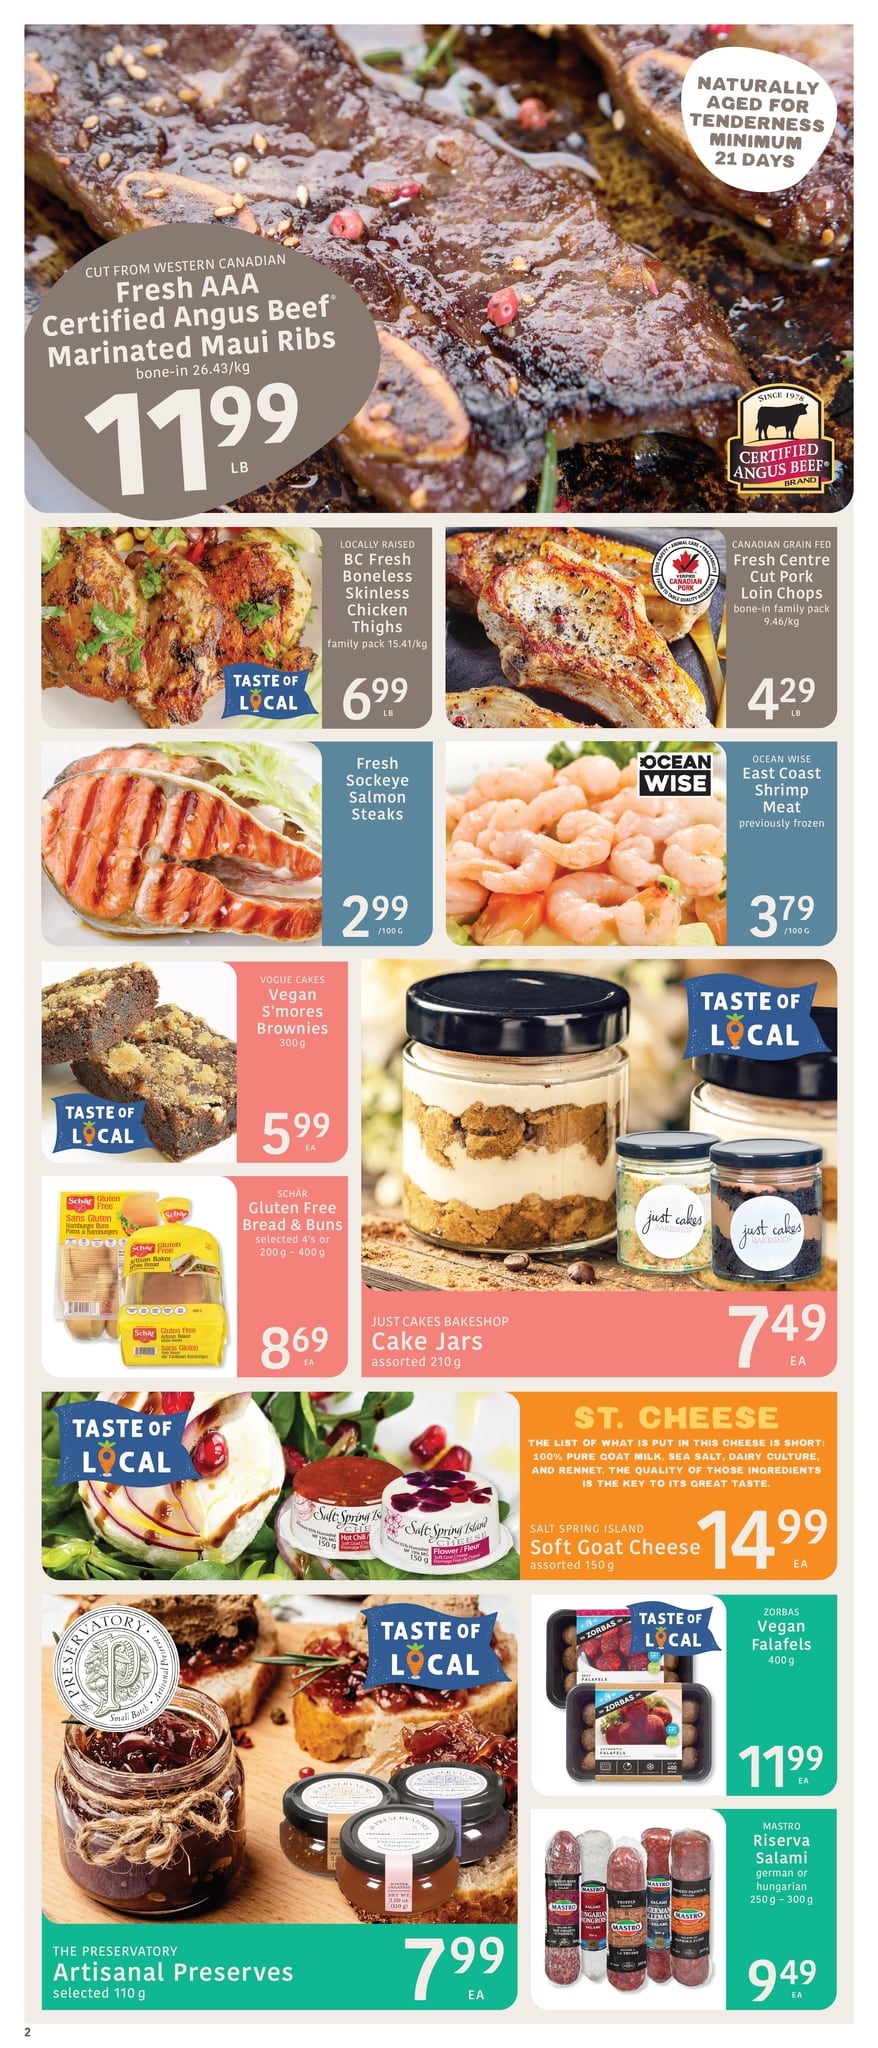 Fresh St. Market - Weekly Flyer Specials - Page 2